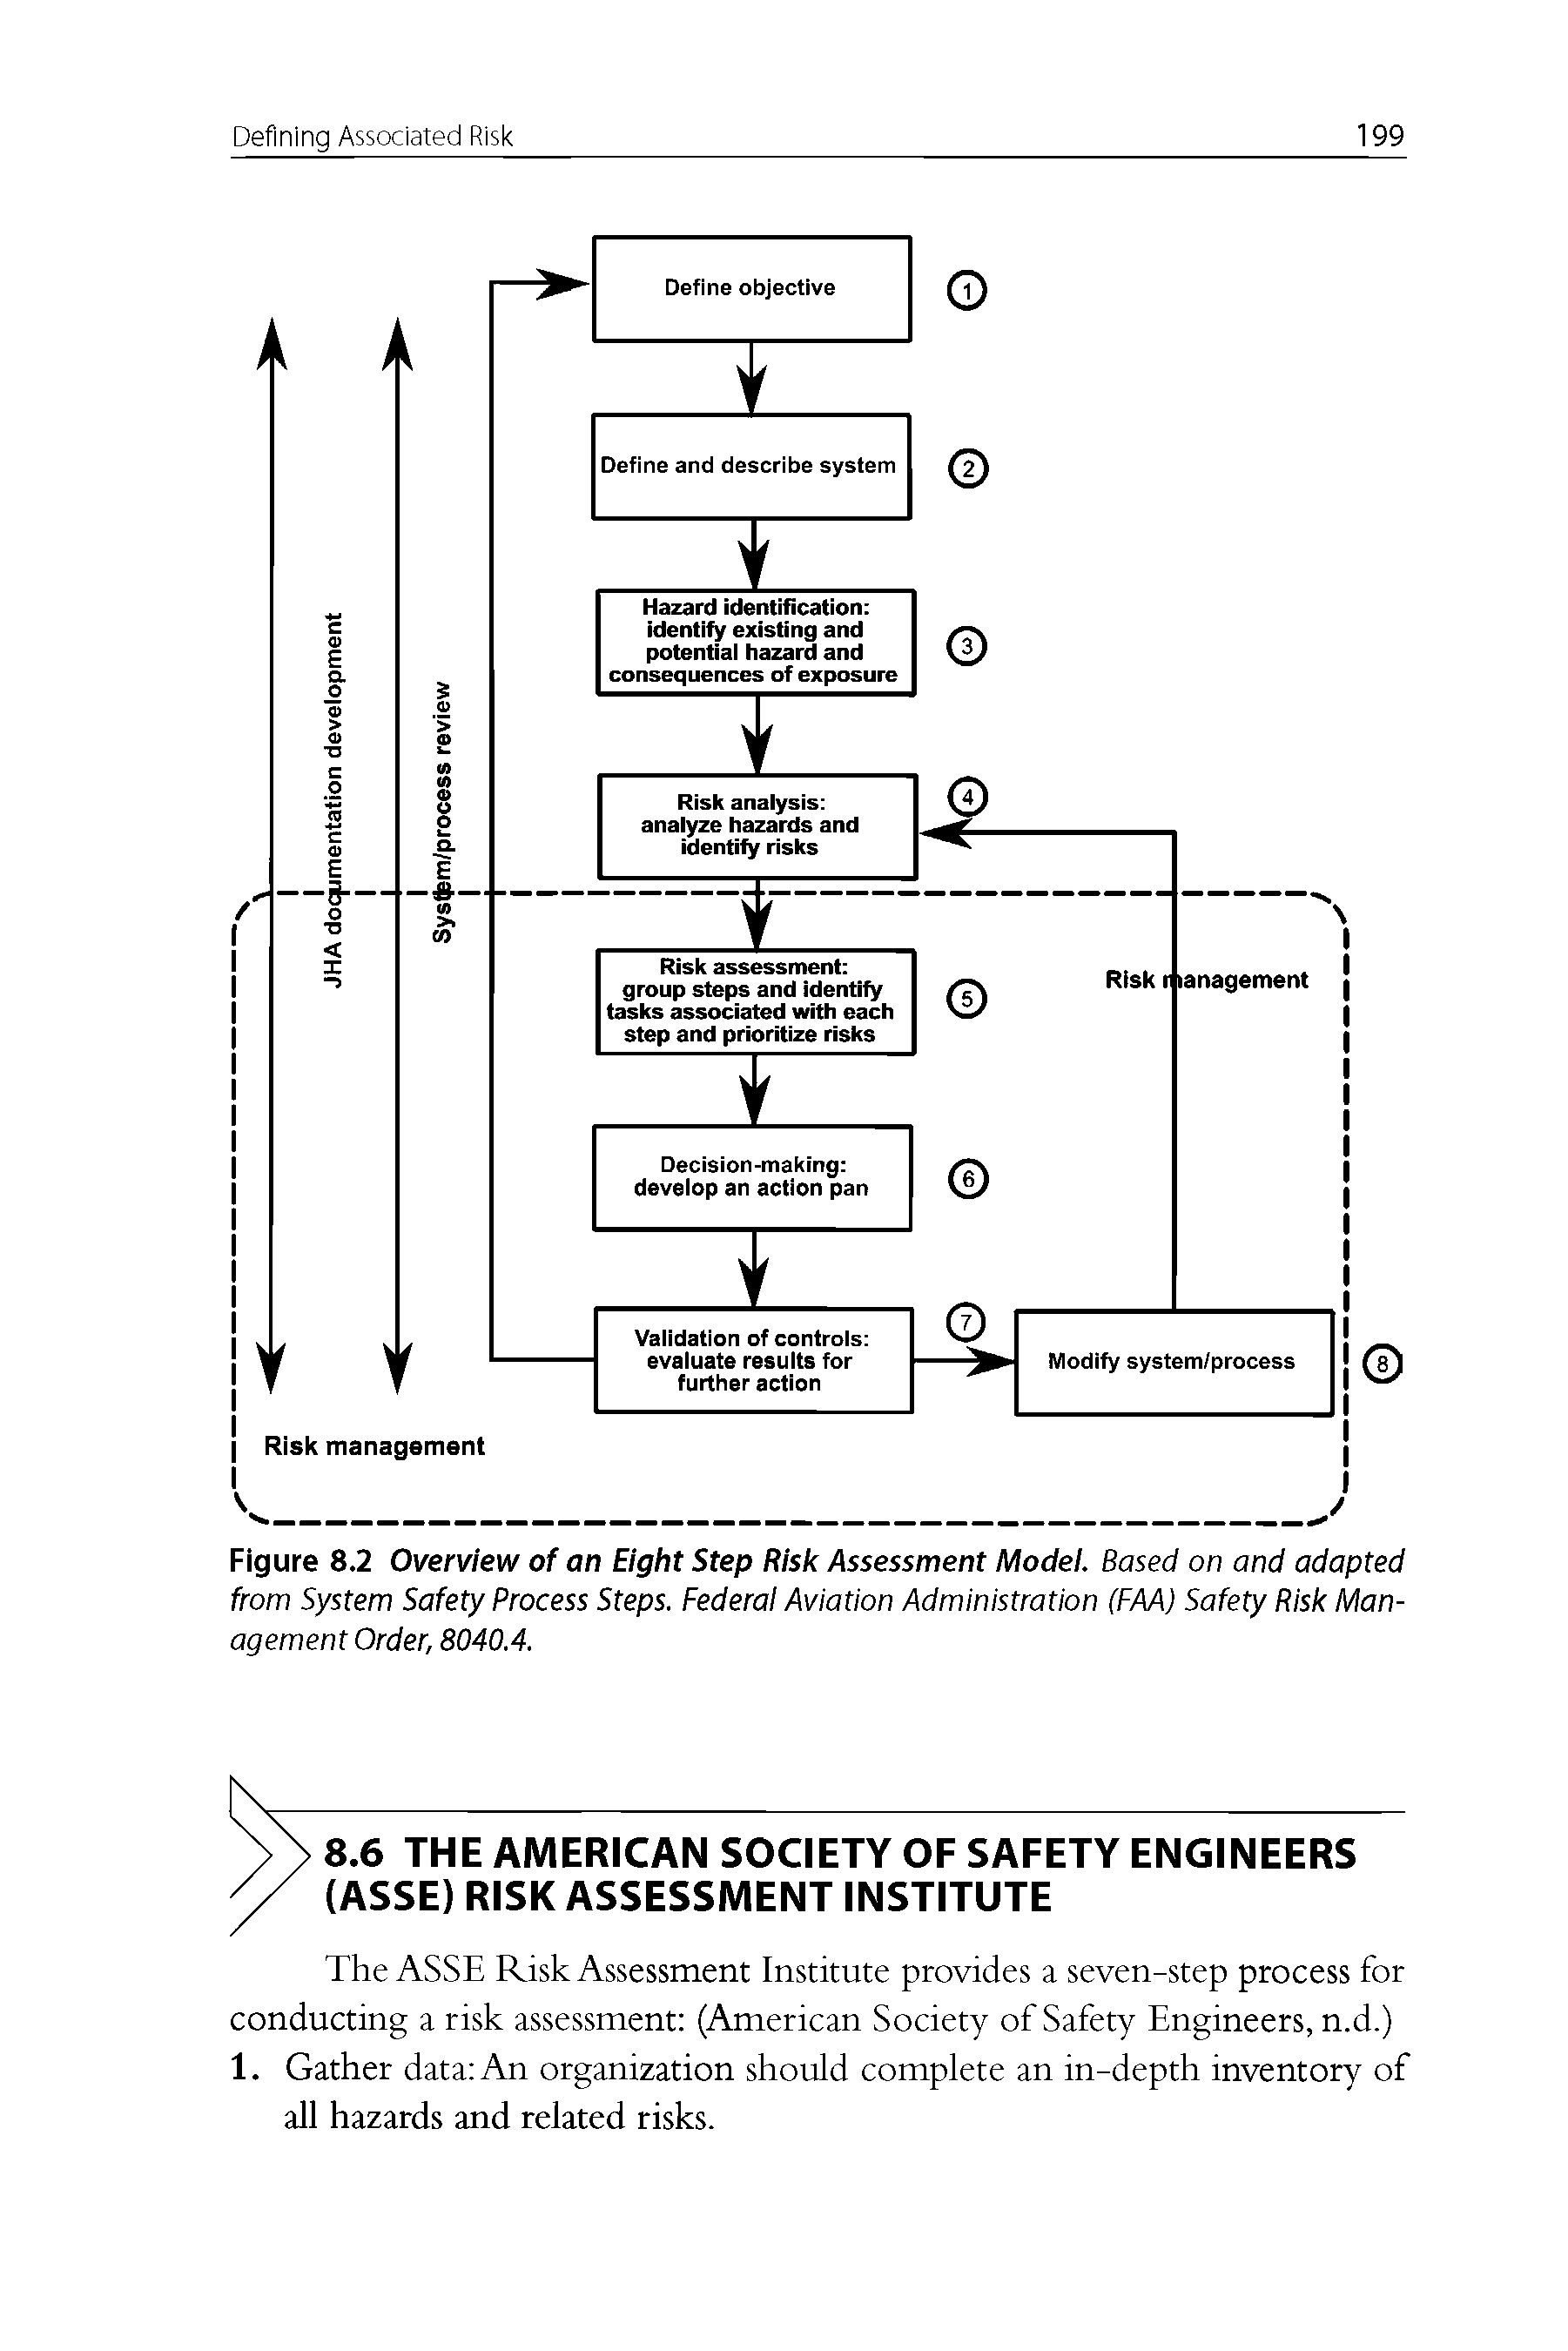 Figure 8.2 Overview of an Eight Step Risk Assessment Model. Based on and adapted from System Safety Process Steps. Federal Aviation Administration (FAA) Safety Risk Management Order, 8040.4.